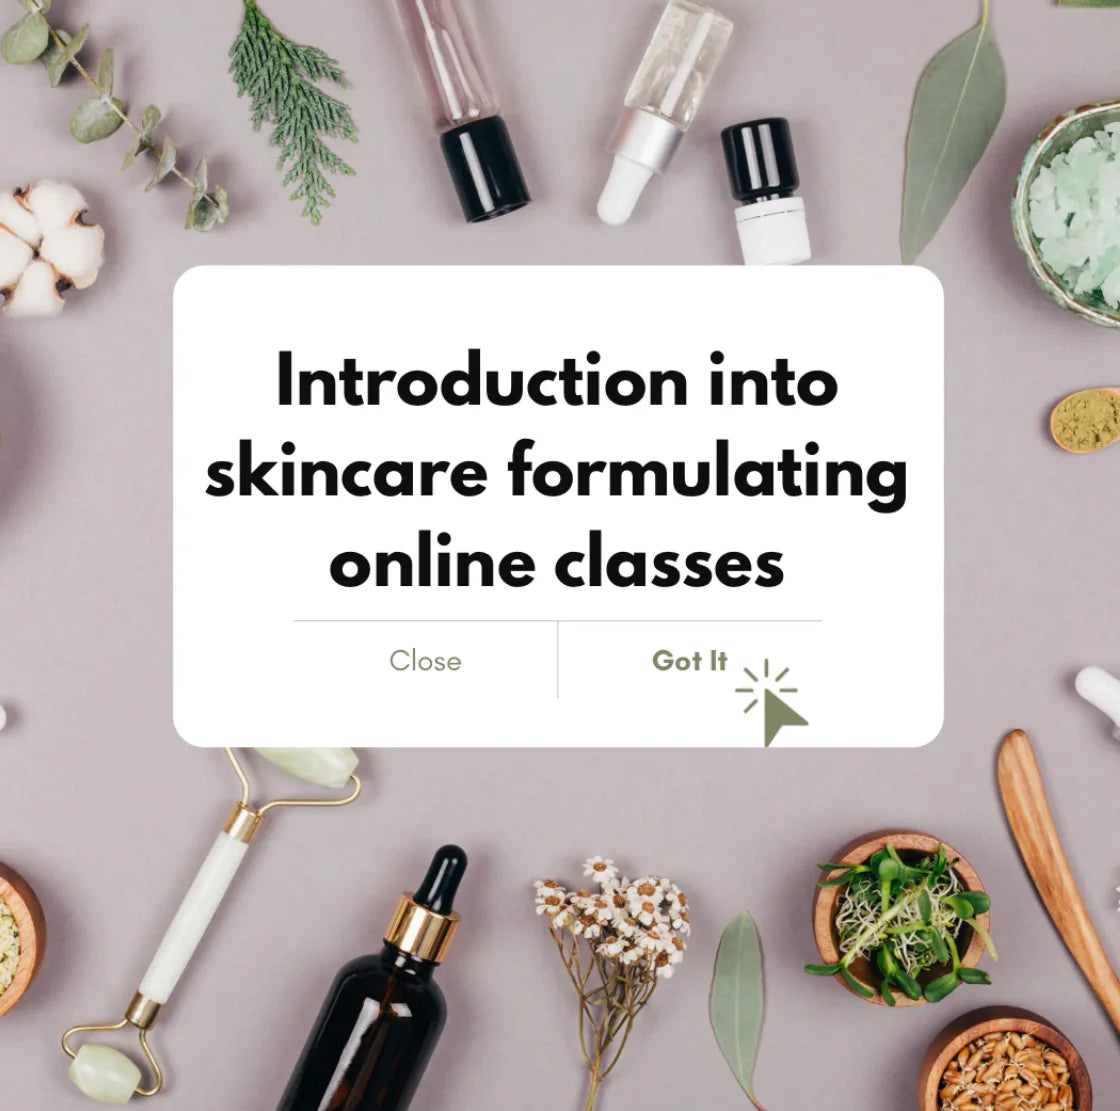 Introduction into skincare formulating - online classes